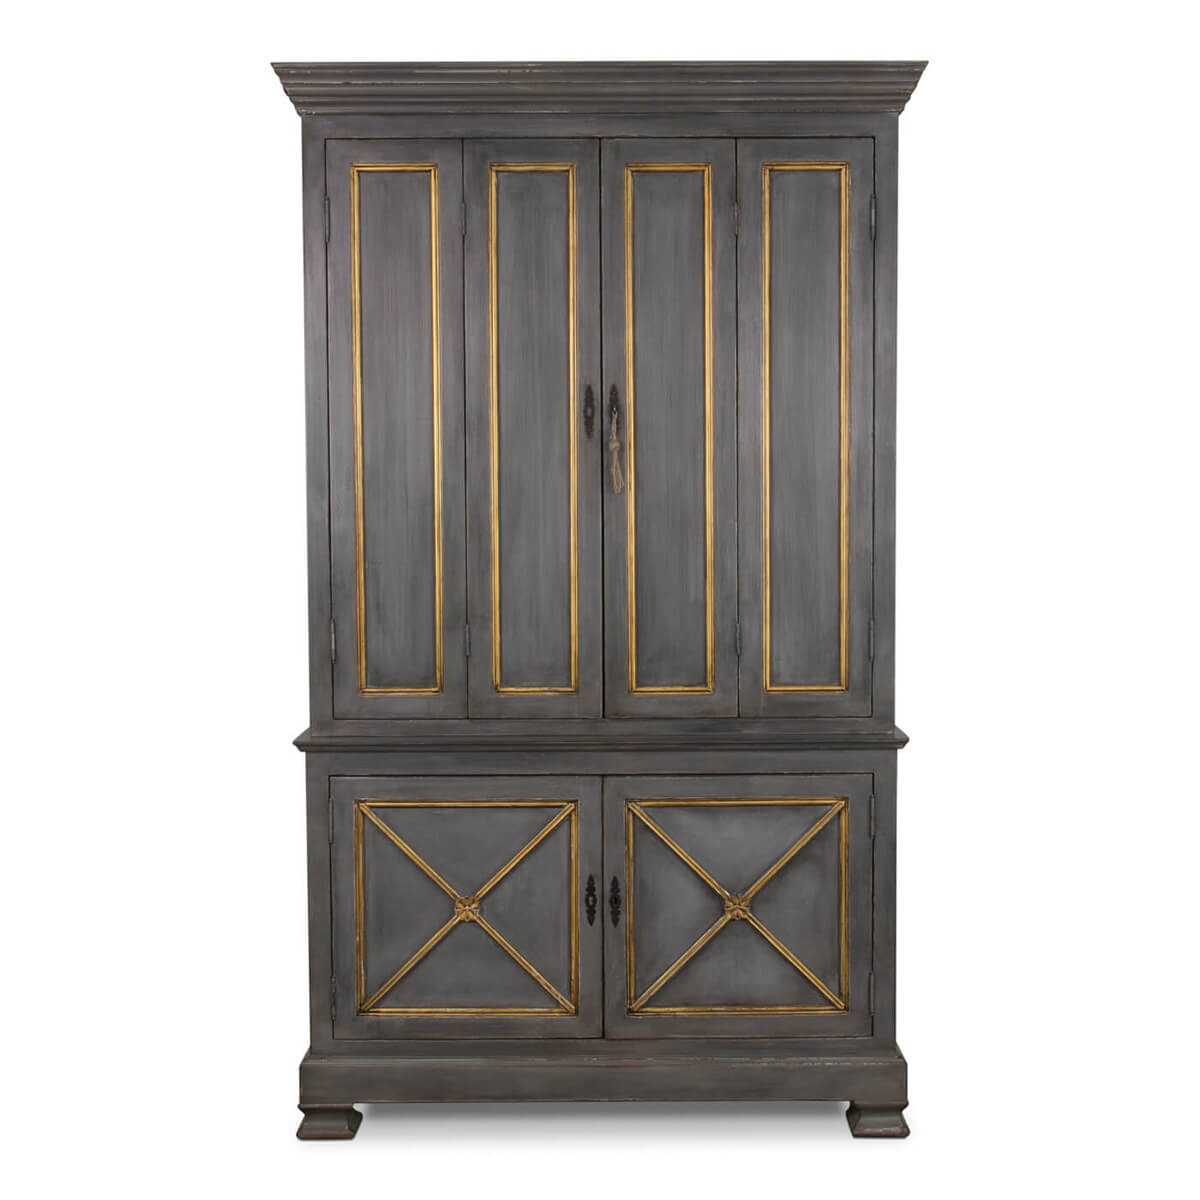 Provincial Painted Tall Bookcase - Grey - English Georgian America